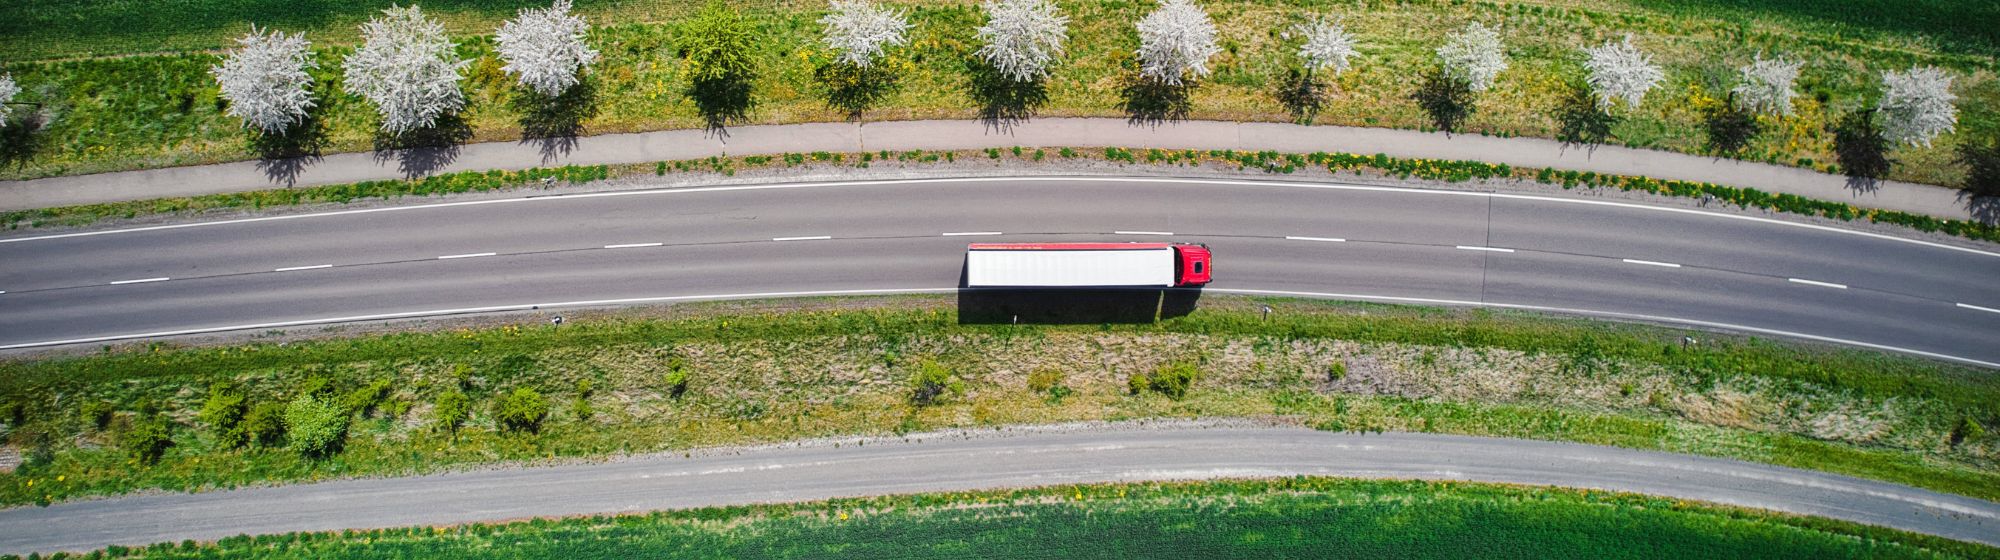 Photo of a truck on a road seen from above